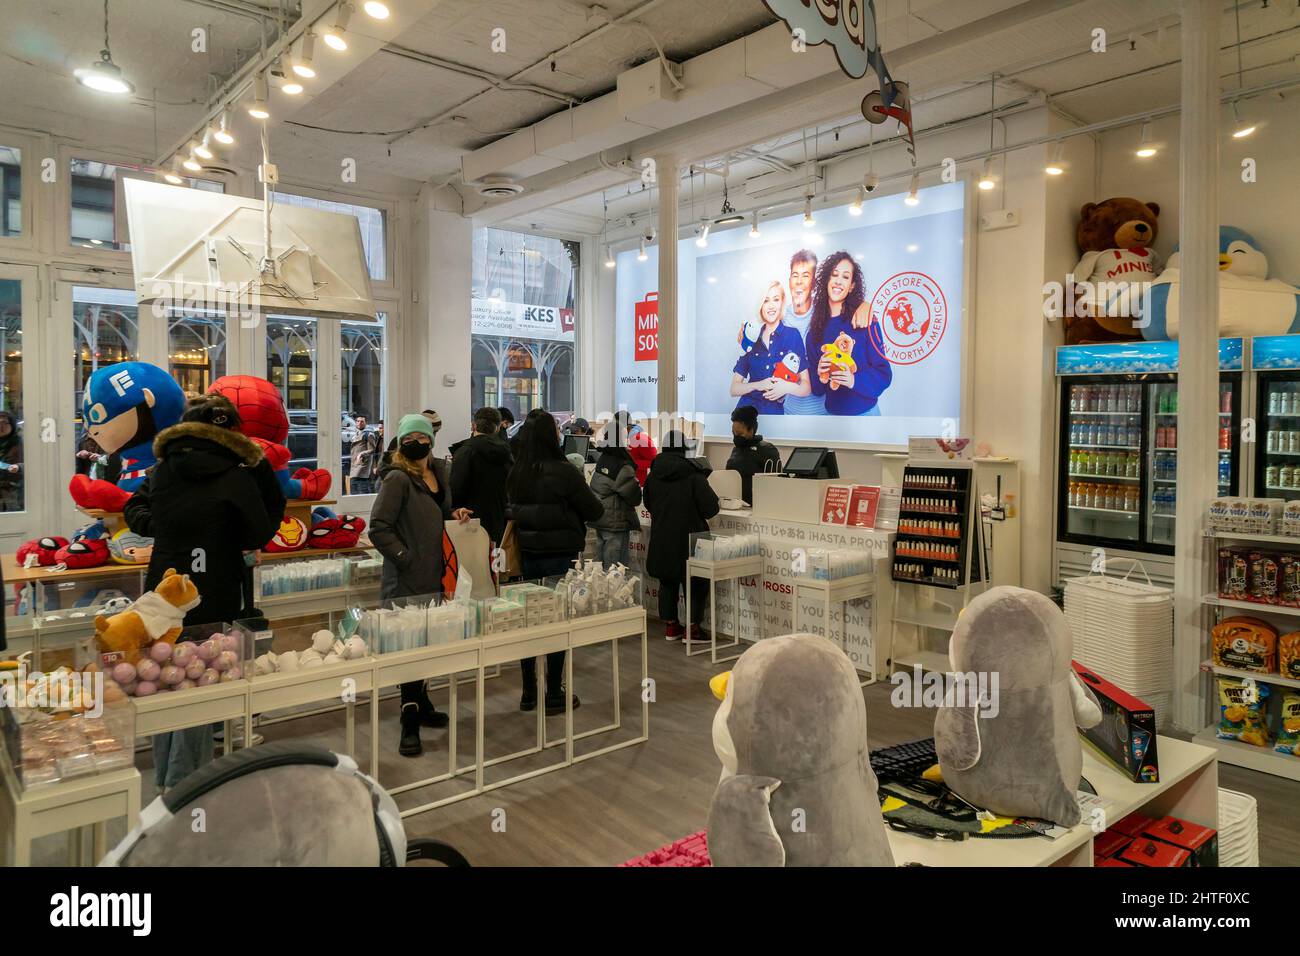 Miniso opens new flagship store in Times Square, NYC - Inside Retail Asia